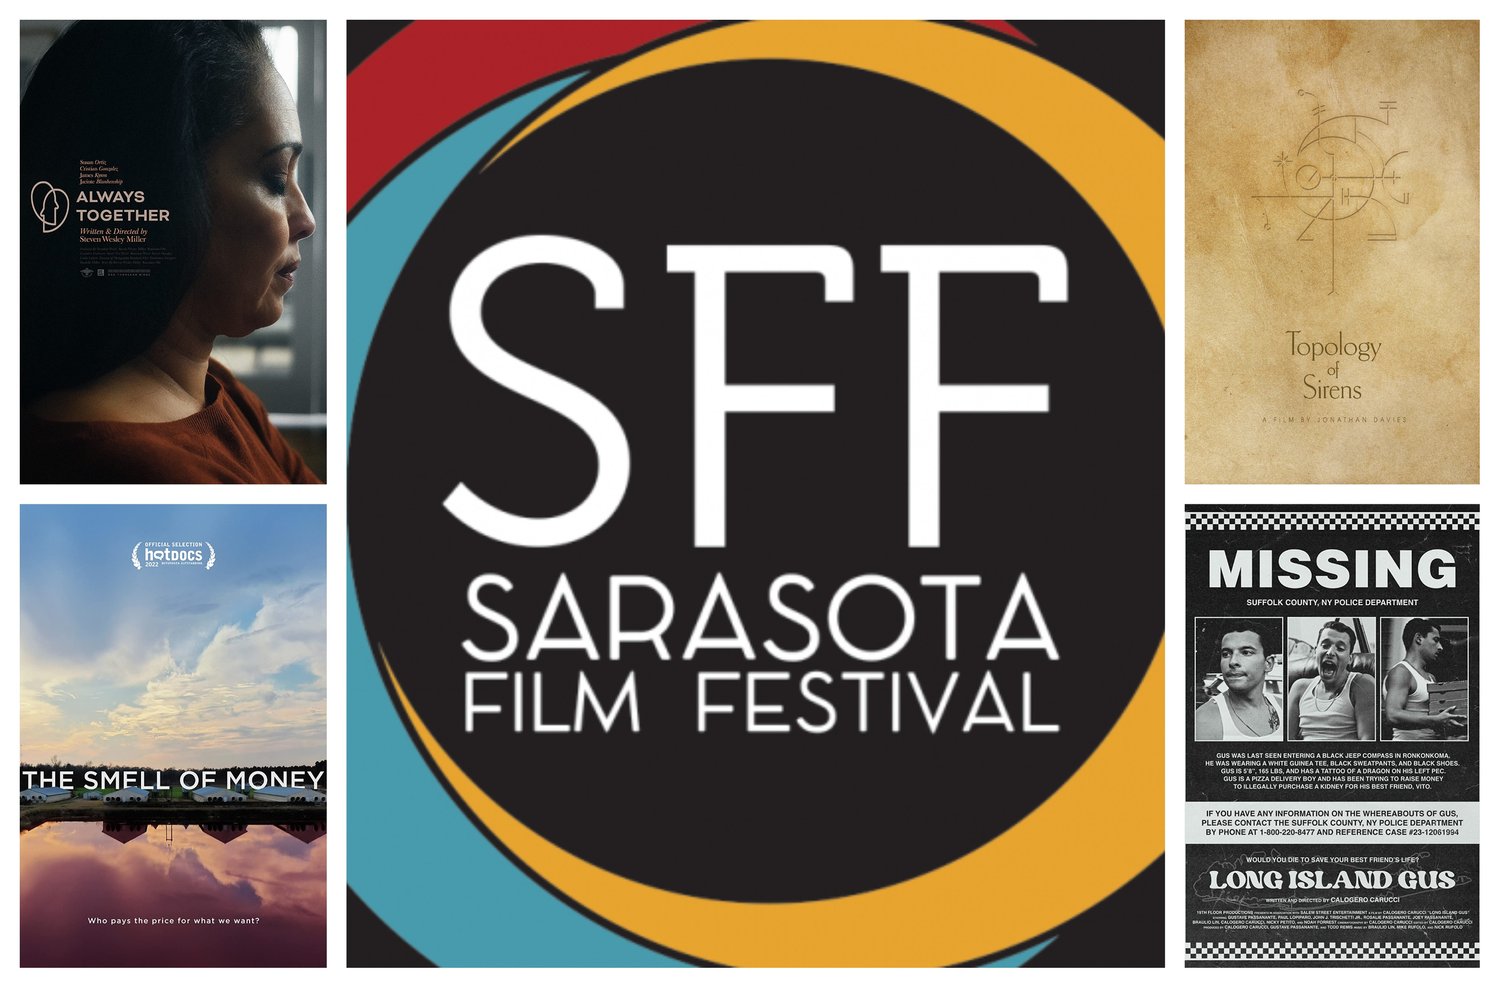 19-facts-about-sarasota-film-festival